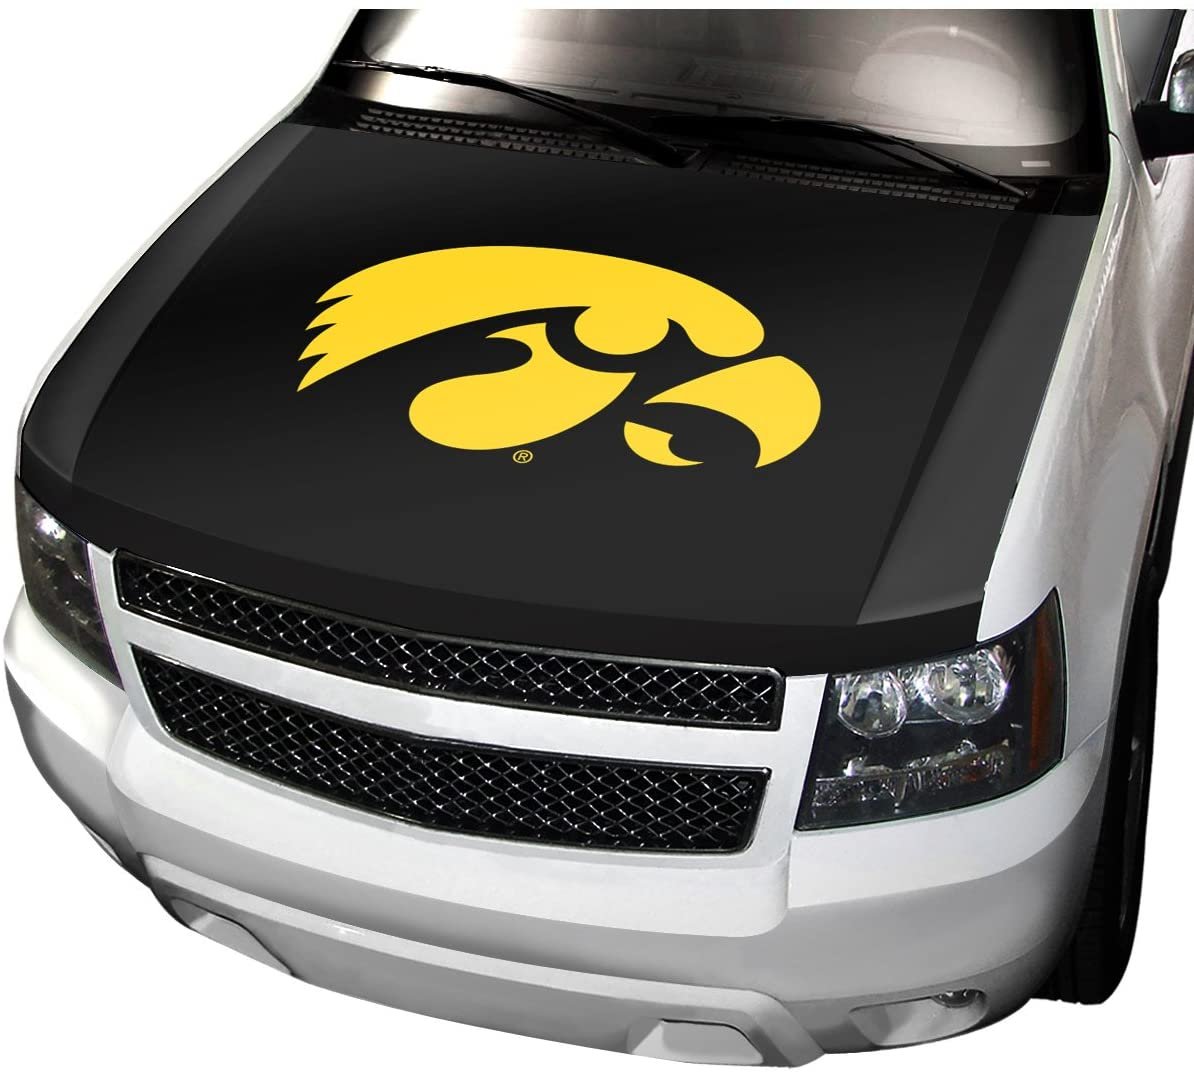 University of Iowa Hawkeyes Auto Hood Cover, One Size, One Color